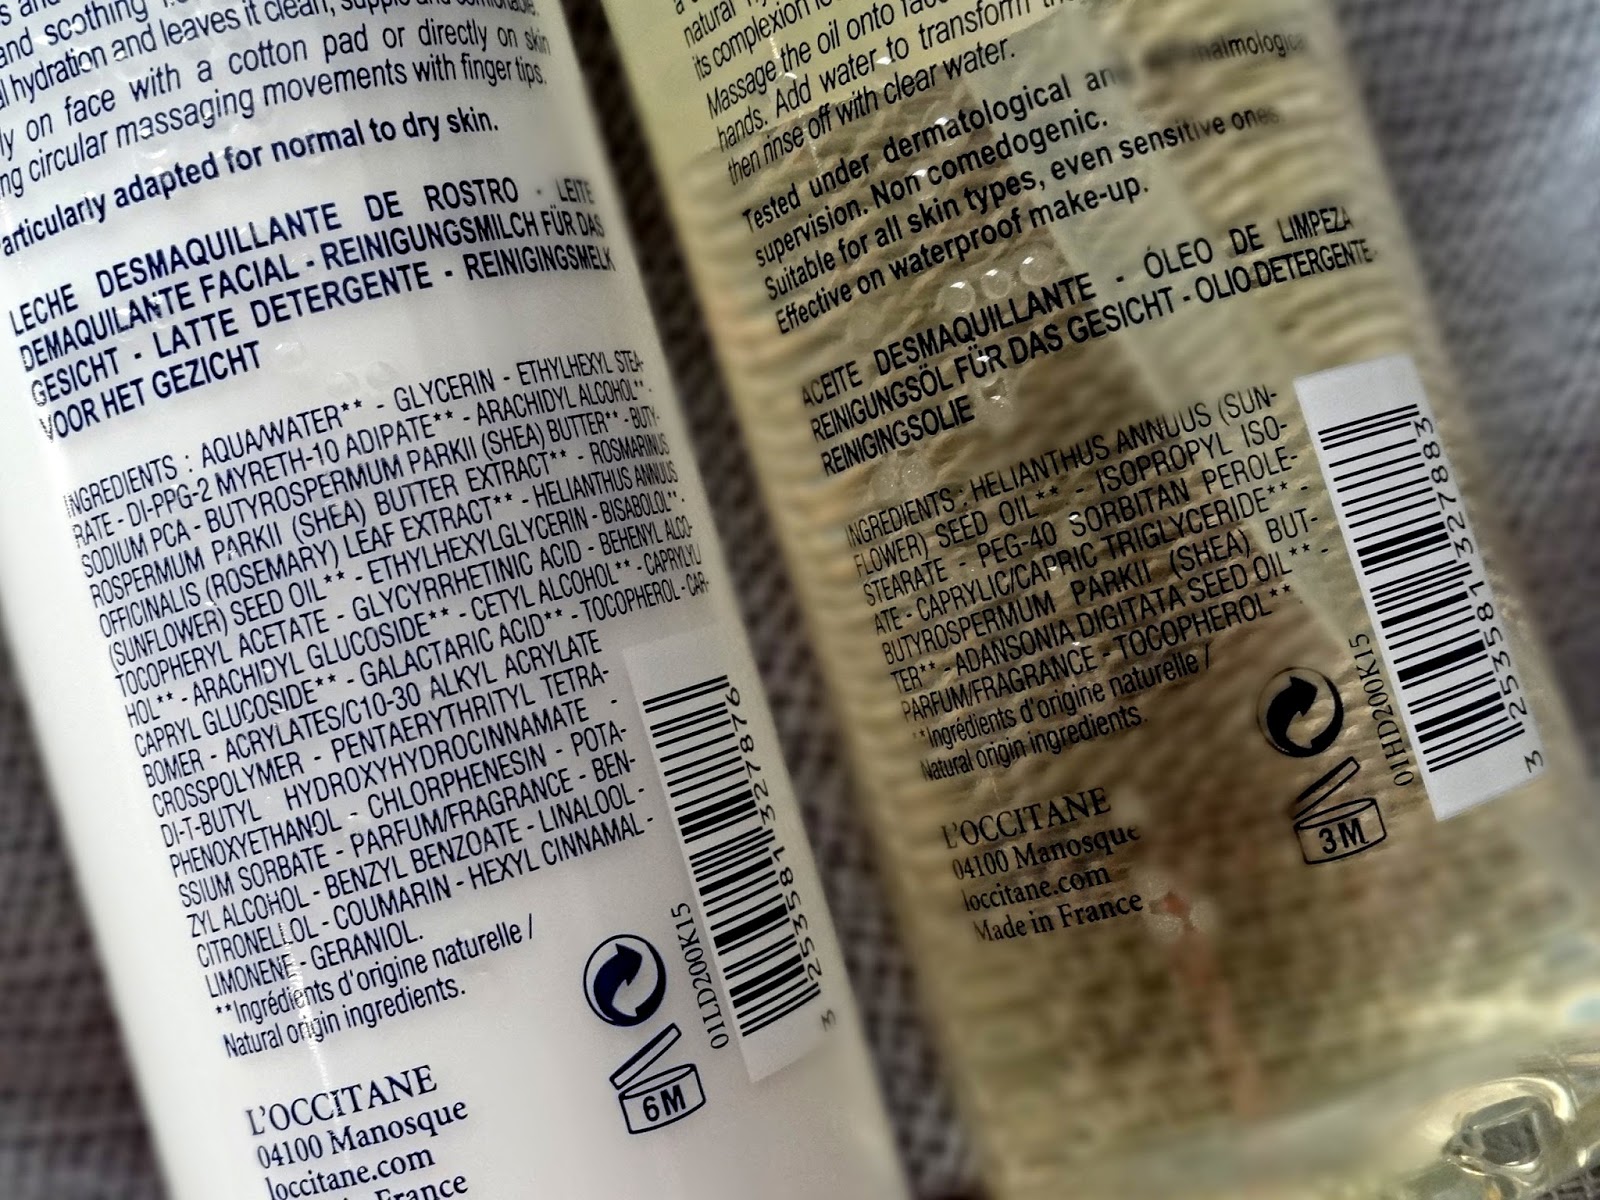 L'Occitane Shea Butter Cleansing Oil and Cleansing Milk Ingredients